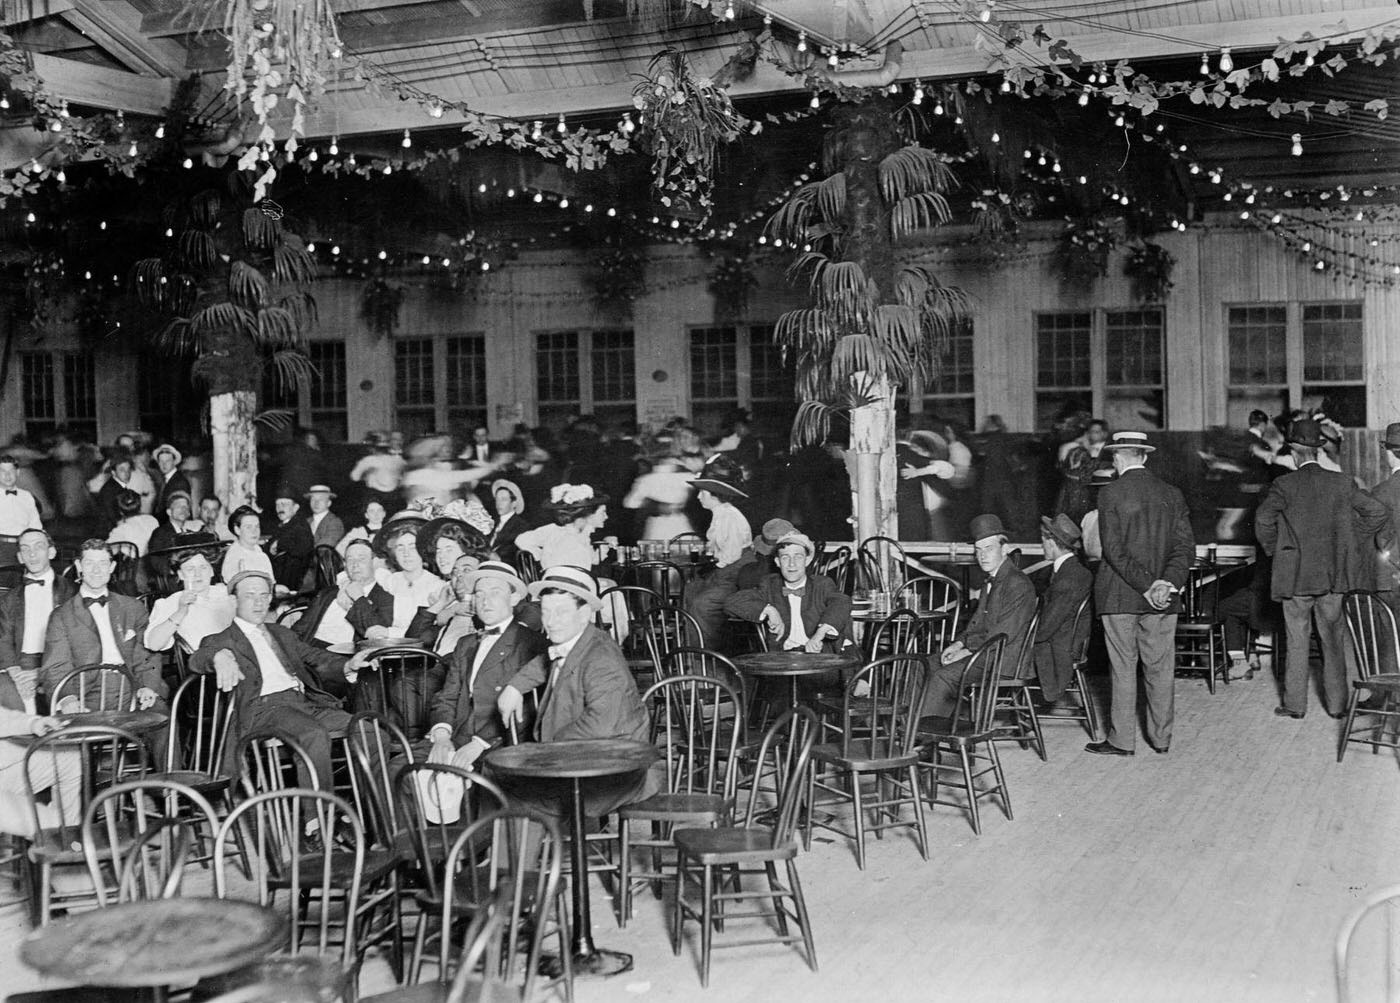 A Group Of Men And Women Watch People Dance On The Dance Floor At A Dance Hall, Harlem, New York City, 1912